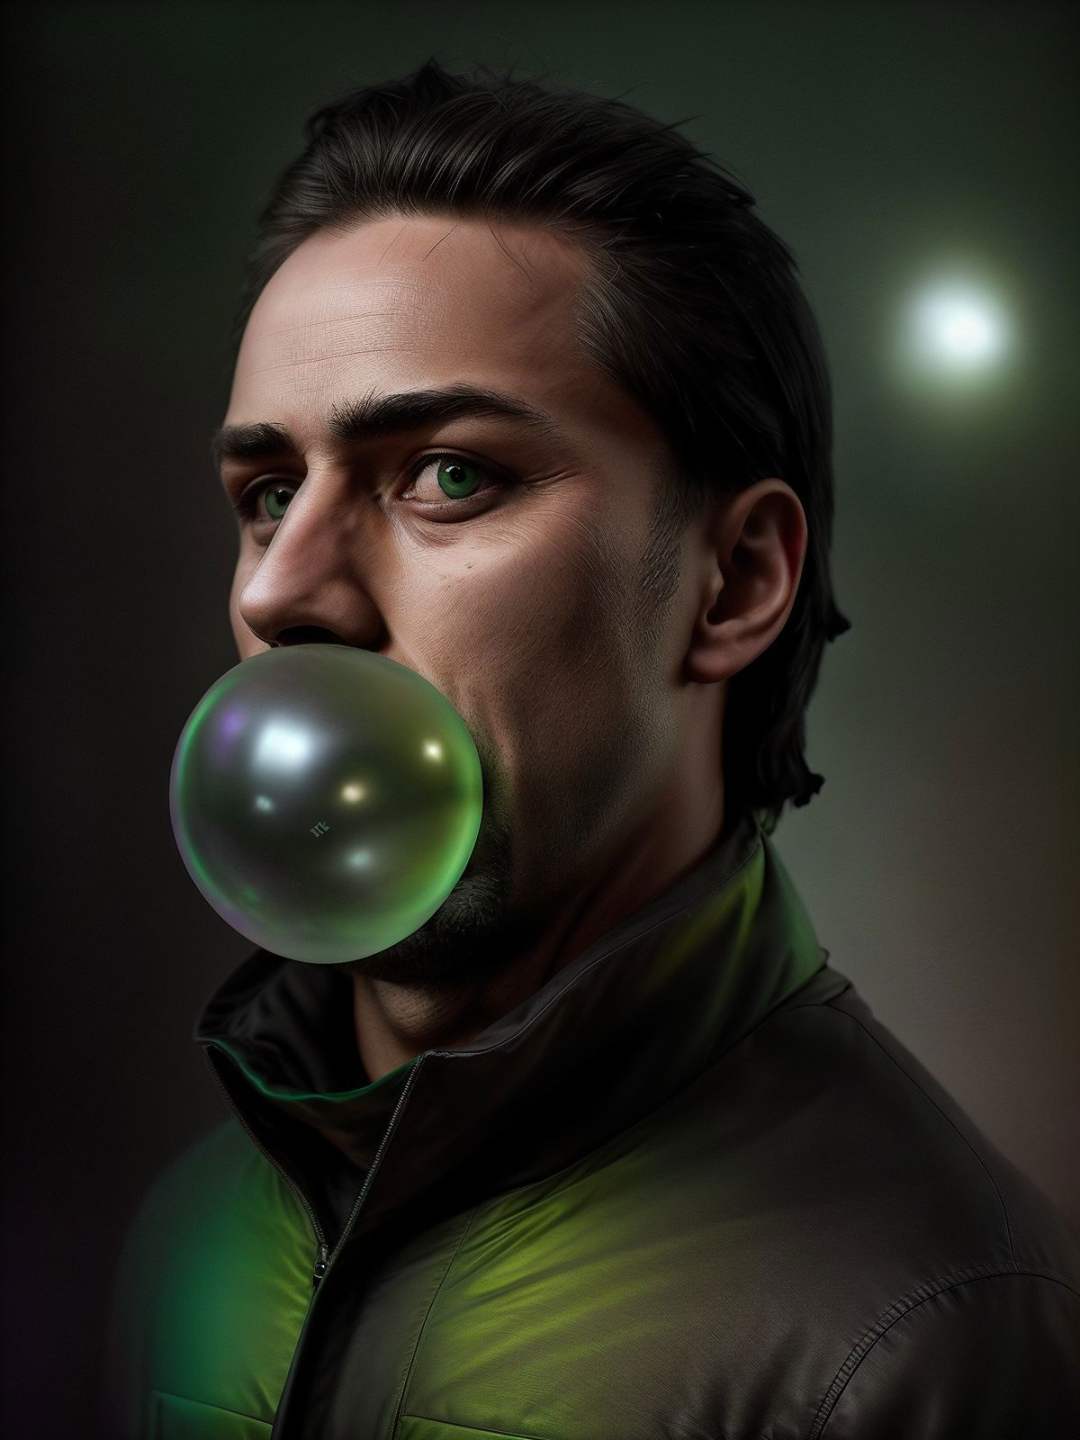 (hdr:1.4), a man, walk away, dark theme, low key, soothing tones, muted colors, high contrast. Inflated bubble gum, blowing bubble gum, green bubble gum, blow gum <lora:Bubble Gum:0.7>